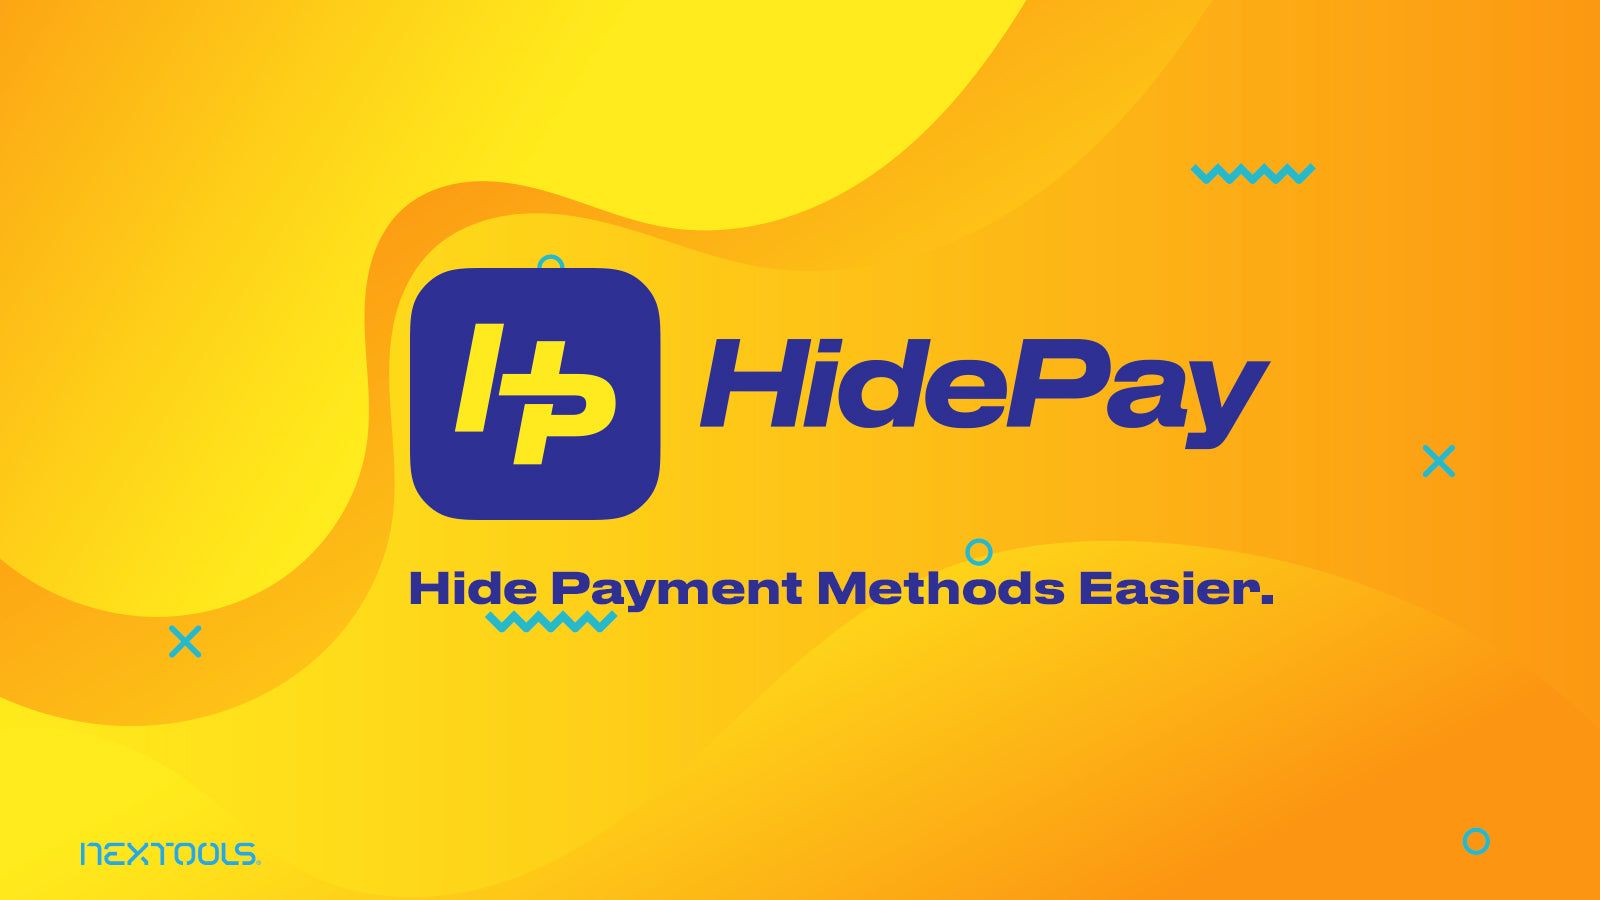 HidePay_payment_methods